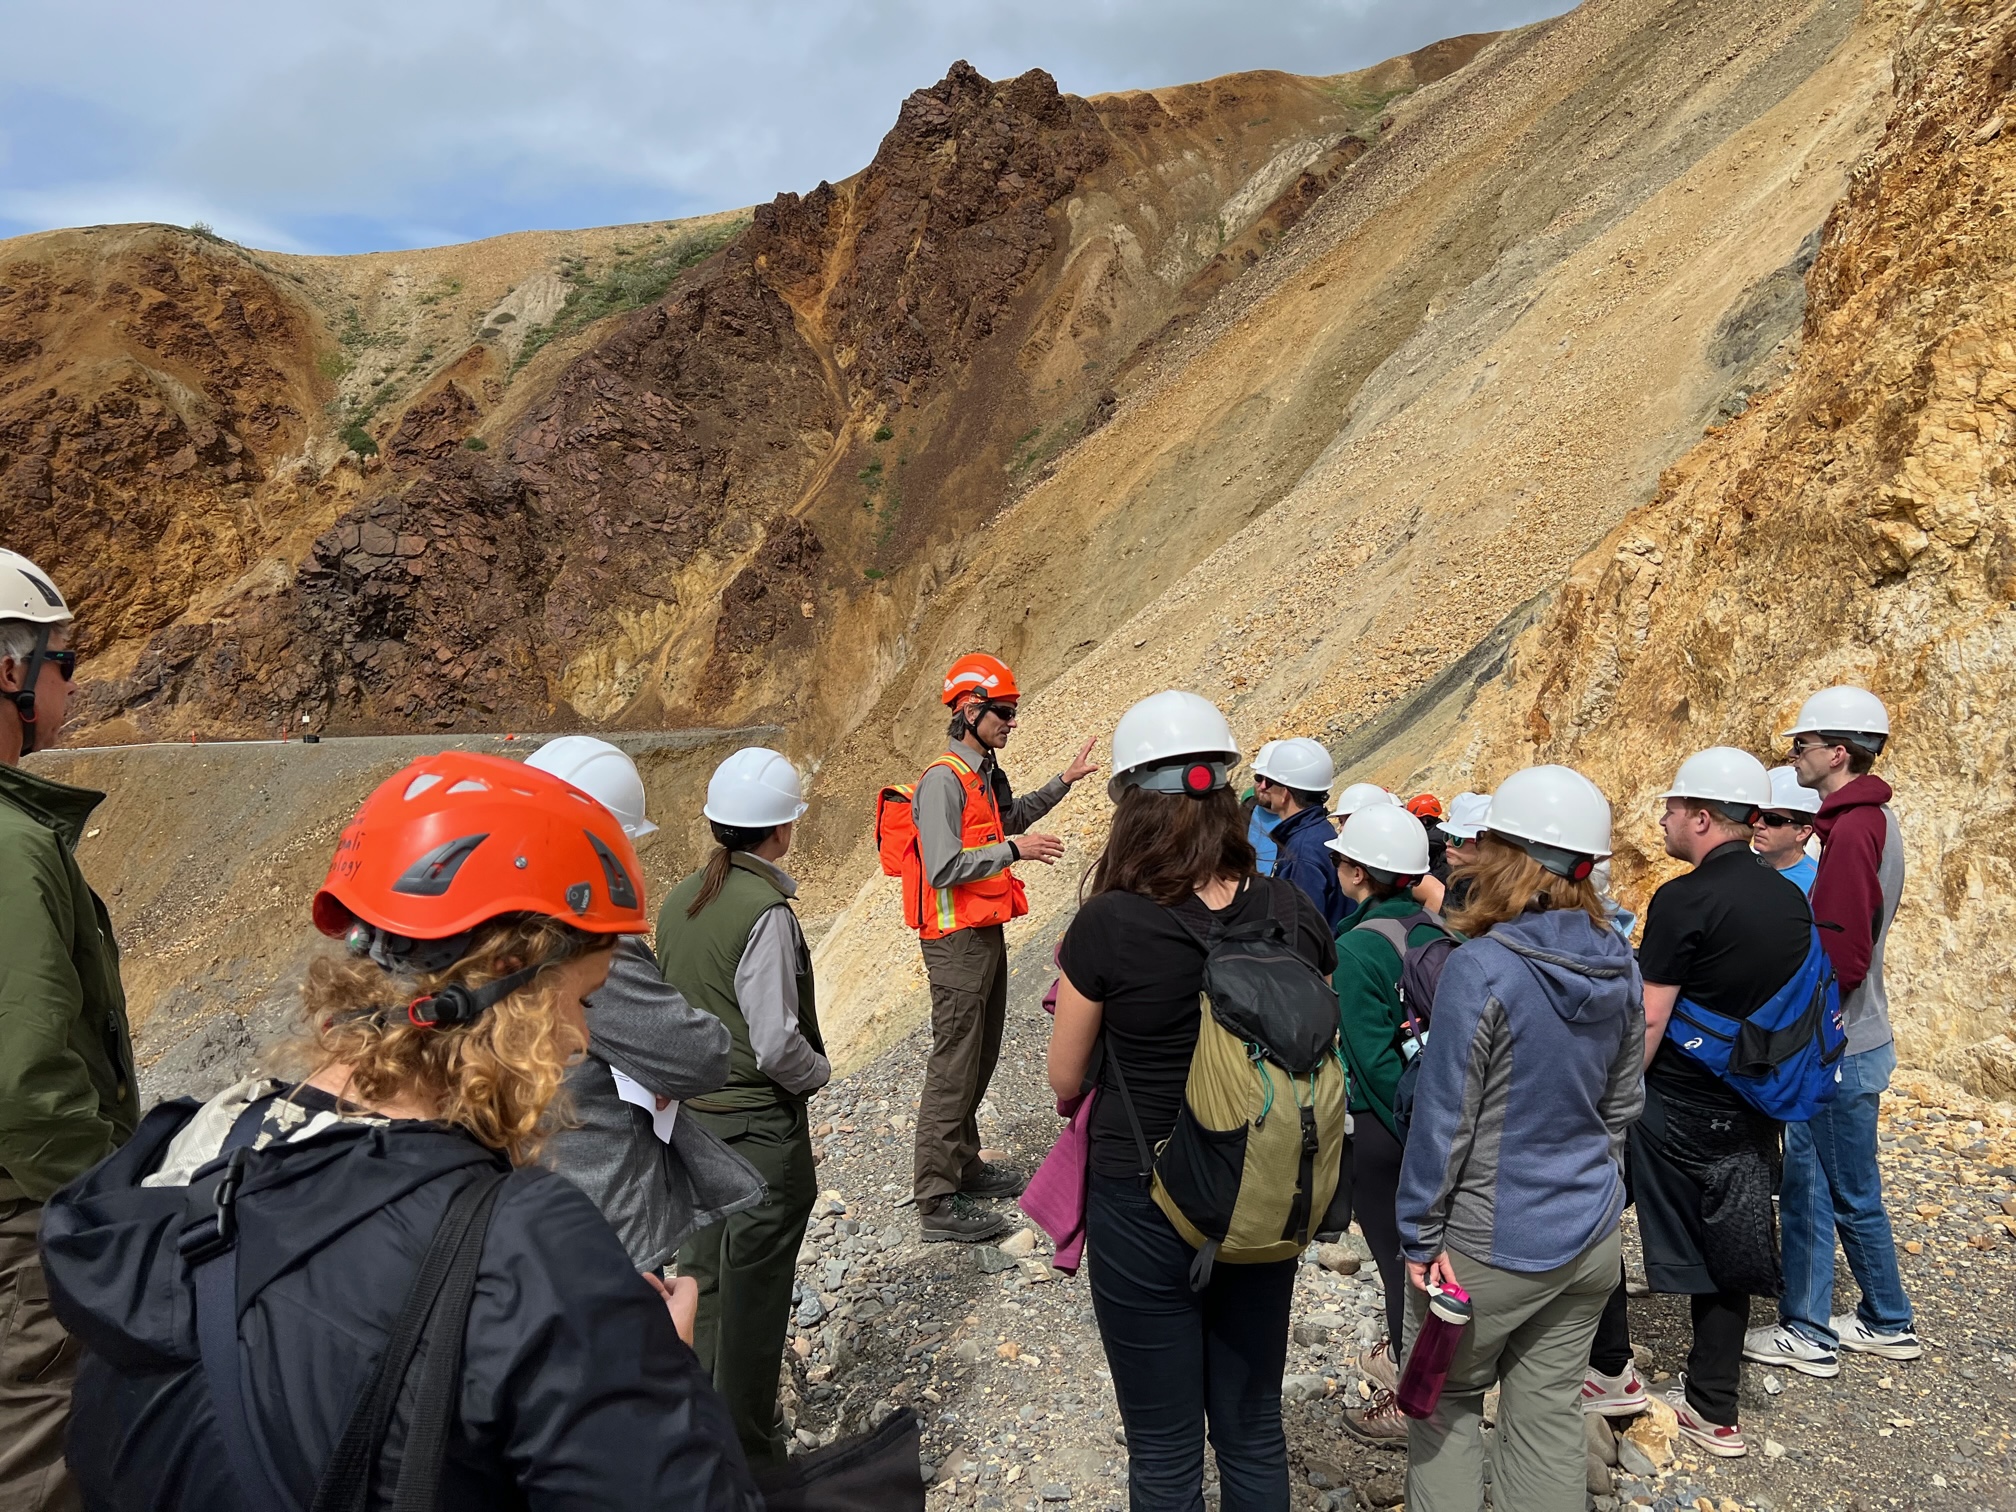 A group of about 15 people wearing protective hard hats stands at the edge of the Pretty Rocks landslide, where the gravel road bed drops away and slumps down a rocky mountainside. A few park staff are in uniform and one man speaks to the whole group.